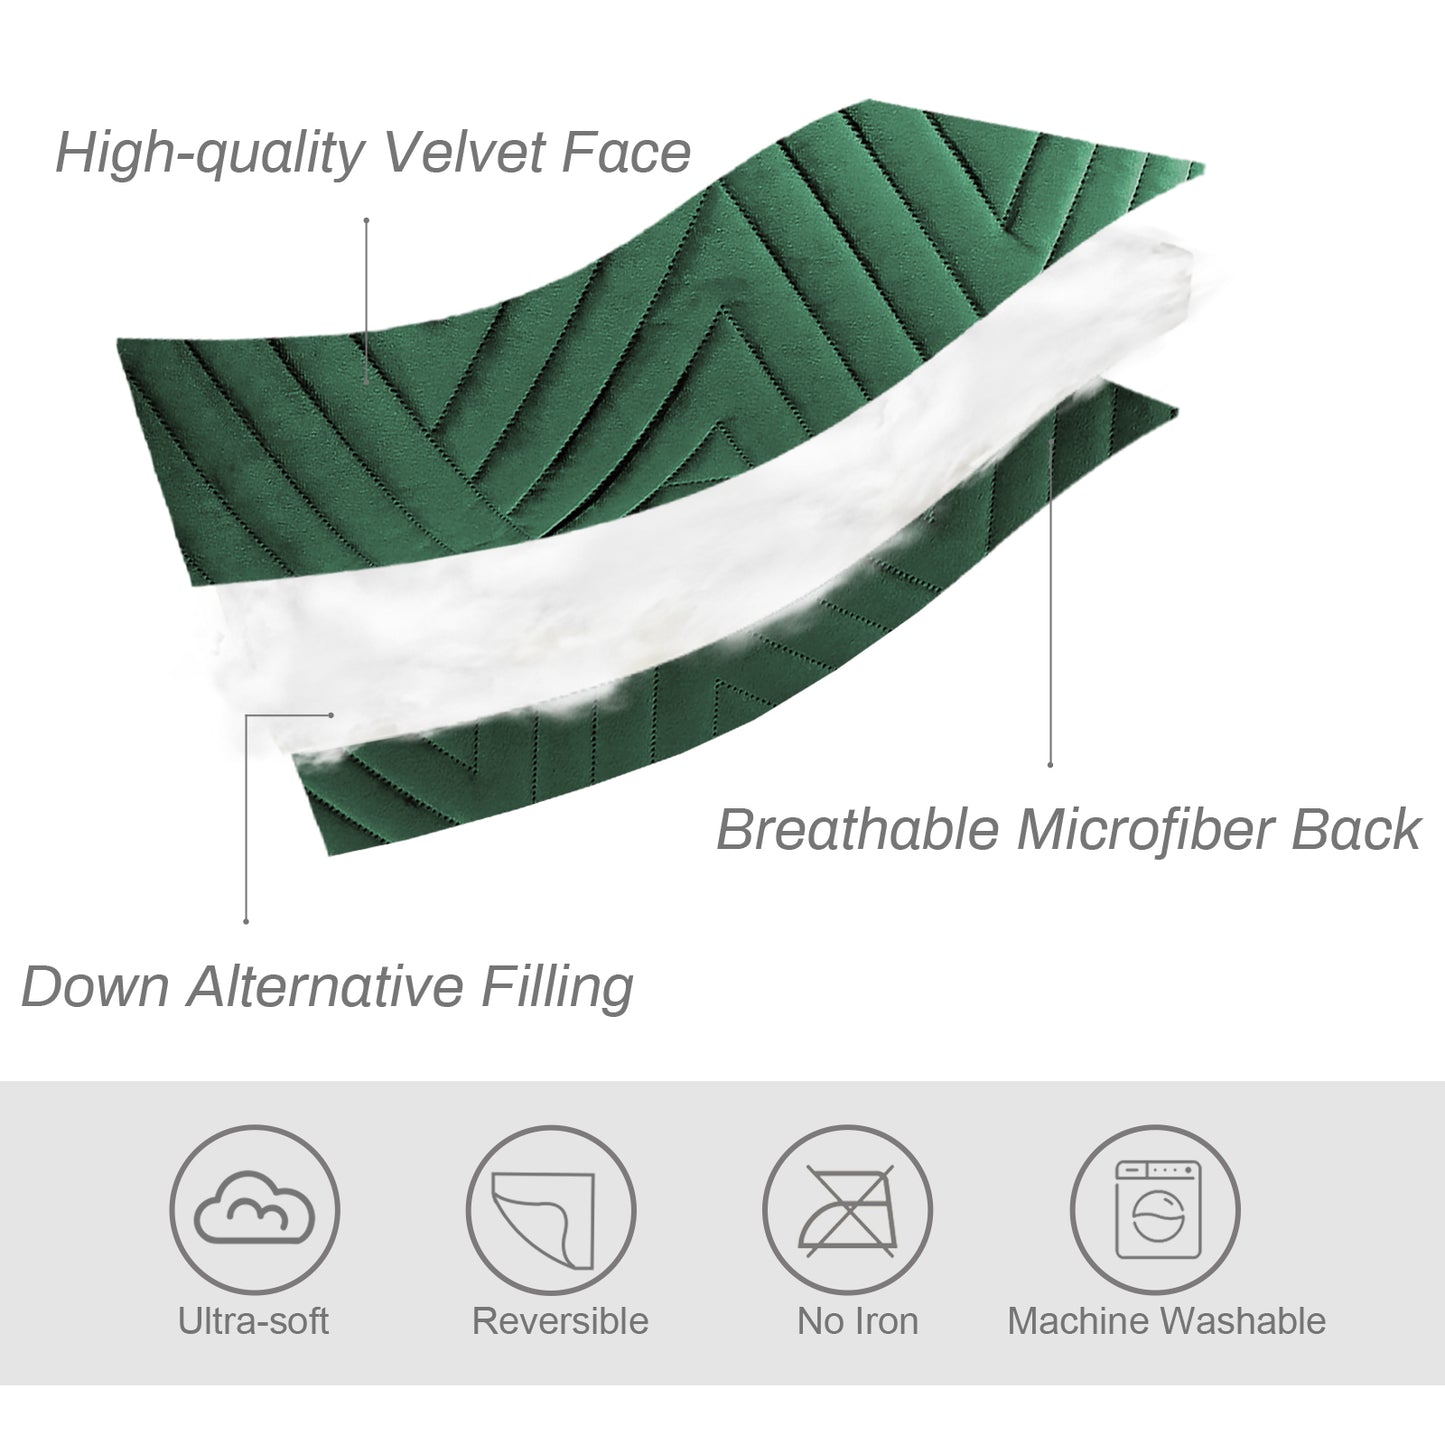 Exclusivo Mezcla Super Plush Velvet Quilt King Size with Pillow Shams, Luxury Soft Reversible 3 Piece Bedspreads Coverlet Comforter Set for All Seasons, Lightweight and Warm, Emerald Green